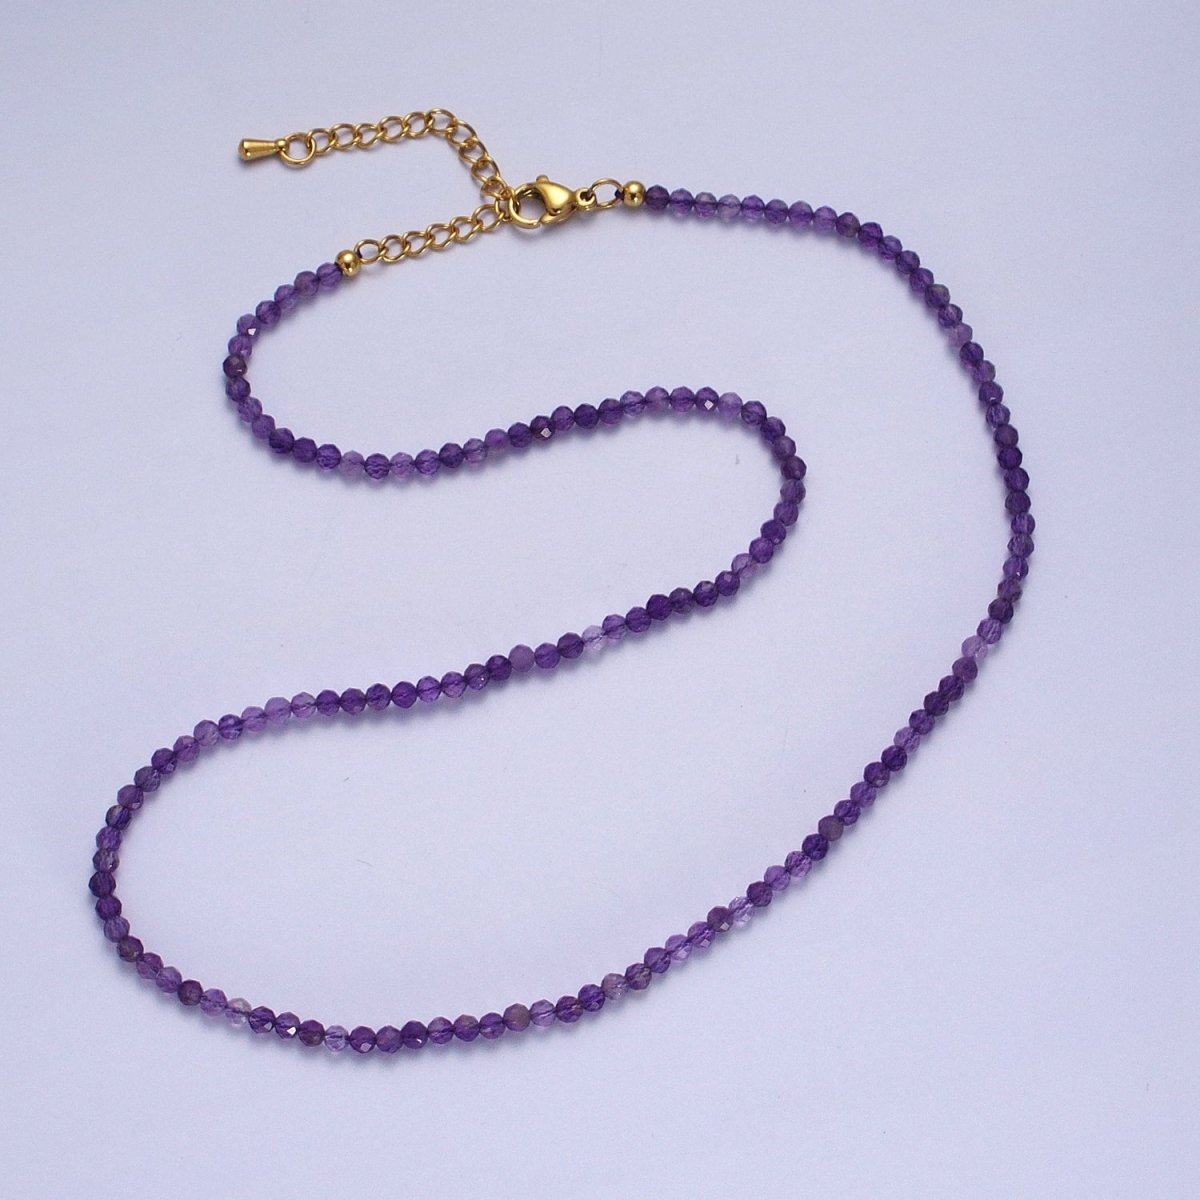 Multifaceted Matte 2.8mm Gemstone Bead 16 Inch Choker Necklace | WA-1469 - WA-1478 Clearance Pricing - DLUXCA